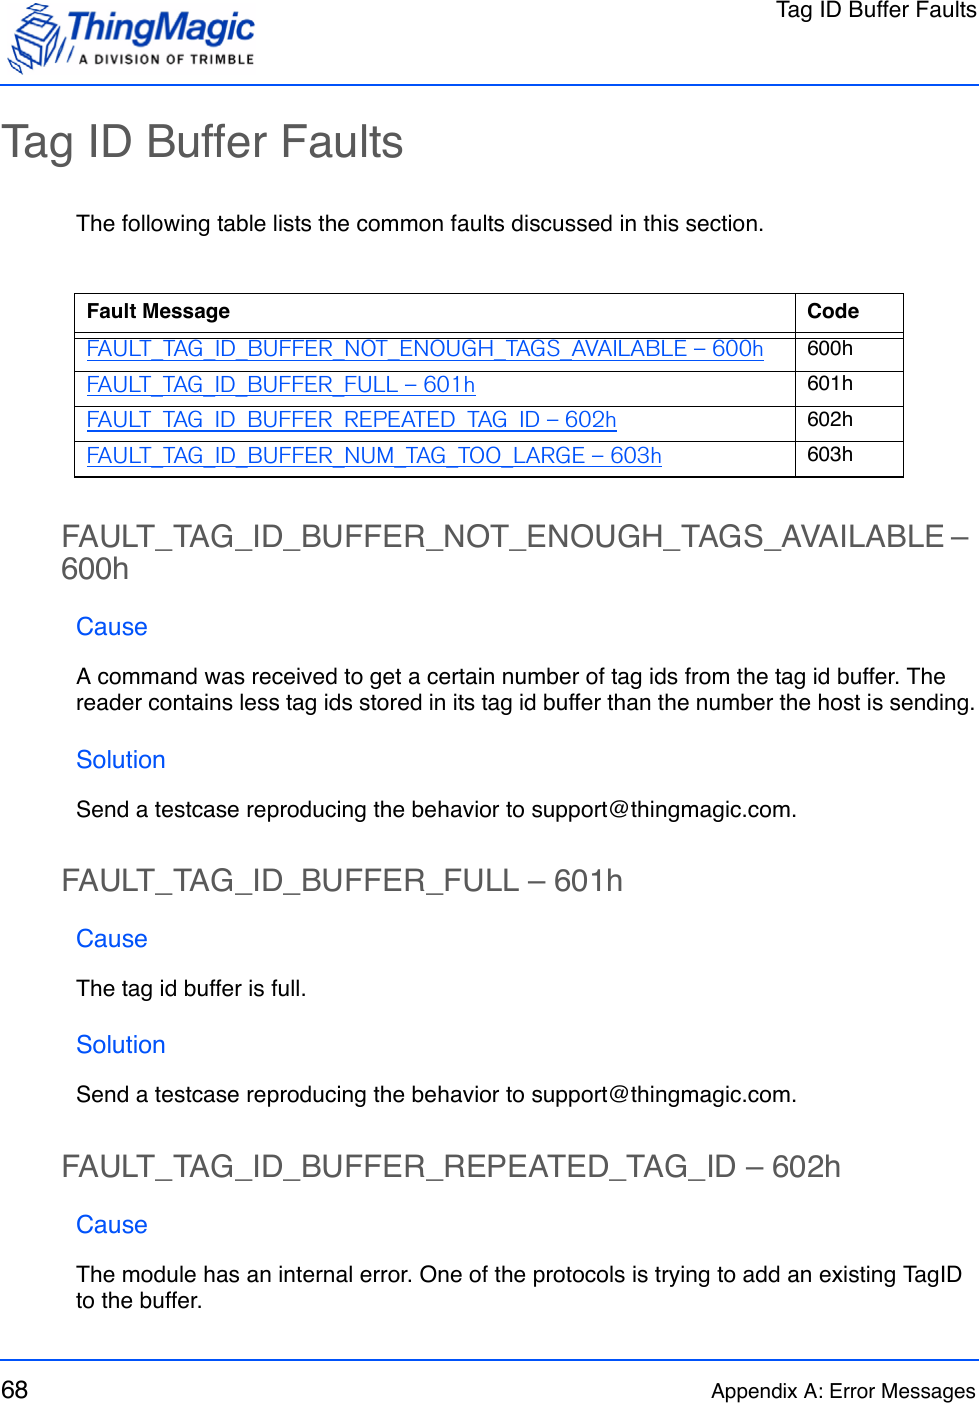 Tag ID Buffer Faults68 Appendix A: Error MessagesTag ID Buffer FaultsThe following table lists the common faults discussed in this section.FAULT_TAG_ID_BUFFER_NOT_ENOUGH_TAGS_AVAILABLE – 600hCauseA command was received to get a certain number of tag ids from the tag id buffer. The reader contains less tag ids stored in its tag id buffer than the number the host is sending.SolutionSend a testcase reproducing the behavior to support@thingmagic.com.FAULT_TAG_ID_BUFFER_FULL – 601hCauseThe tag id buffer is full.SolutionSend a testcase reproducing the behavior to support@thingmagic.com.FAULT_TAG_ID_BUFFER_REPEATED_TAG_ID – 602hCauseThe module has an internal error. One of the protocols is trying to add an existing TagID to the buffer.Fault Message CodeFAULT_TAG_ID_BUFFER_NOT_ENOUGH_TAGS_AVAILABLE – 600h 600hFAULT_TAG_ID_BUFFER_FULL – 601h 601hFAULT_TAG_ID_BUFFER_REPEATED_TAG_ID – 602h 602hFAULT_TAG_ID_BUFFER_NUM_TAG_TOO_LARGE – 603h 603h